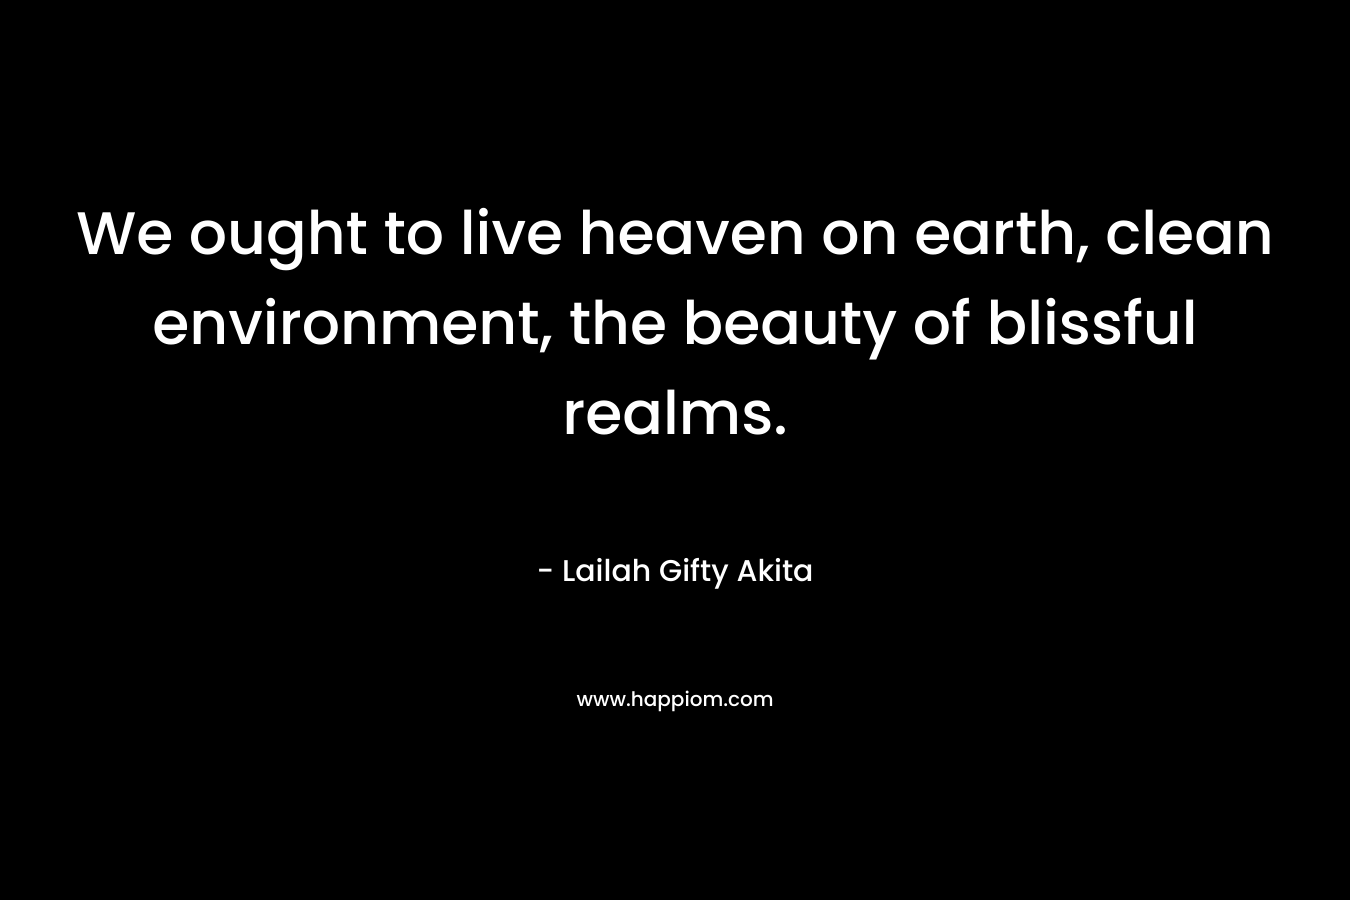 We ought to live heaven on earth, clean environment, the beauty of blissful realms.